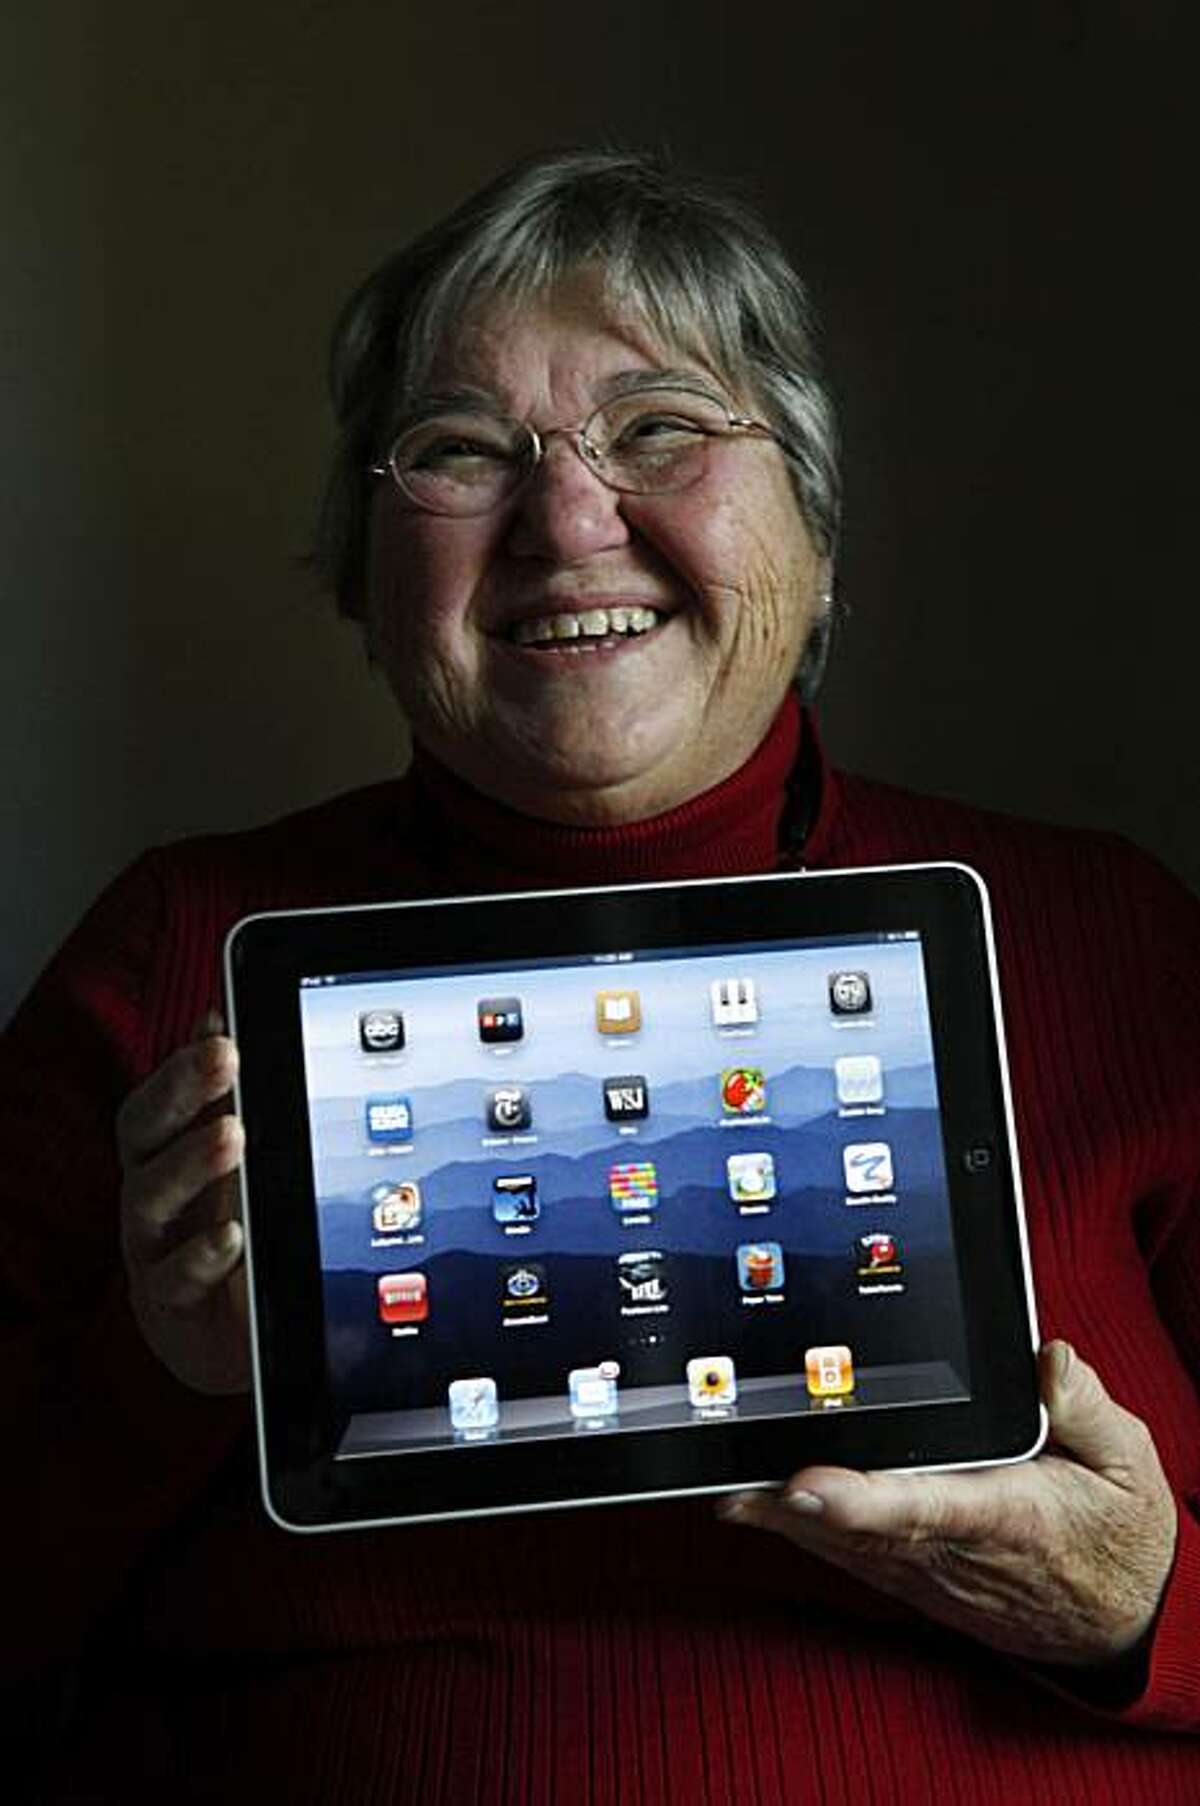 Rita Schena, 78, sits for a portrait with her new iPad at home on Thursday April 29, 2010 in Menlo Park, Calif. Schena said she is very excited to have this device and feels its perfect for seniors on the go.